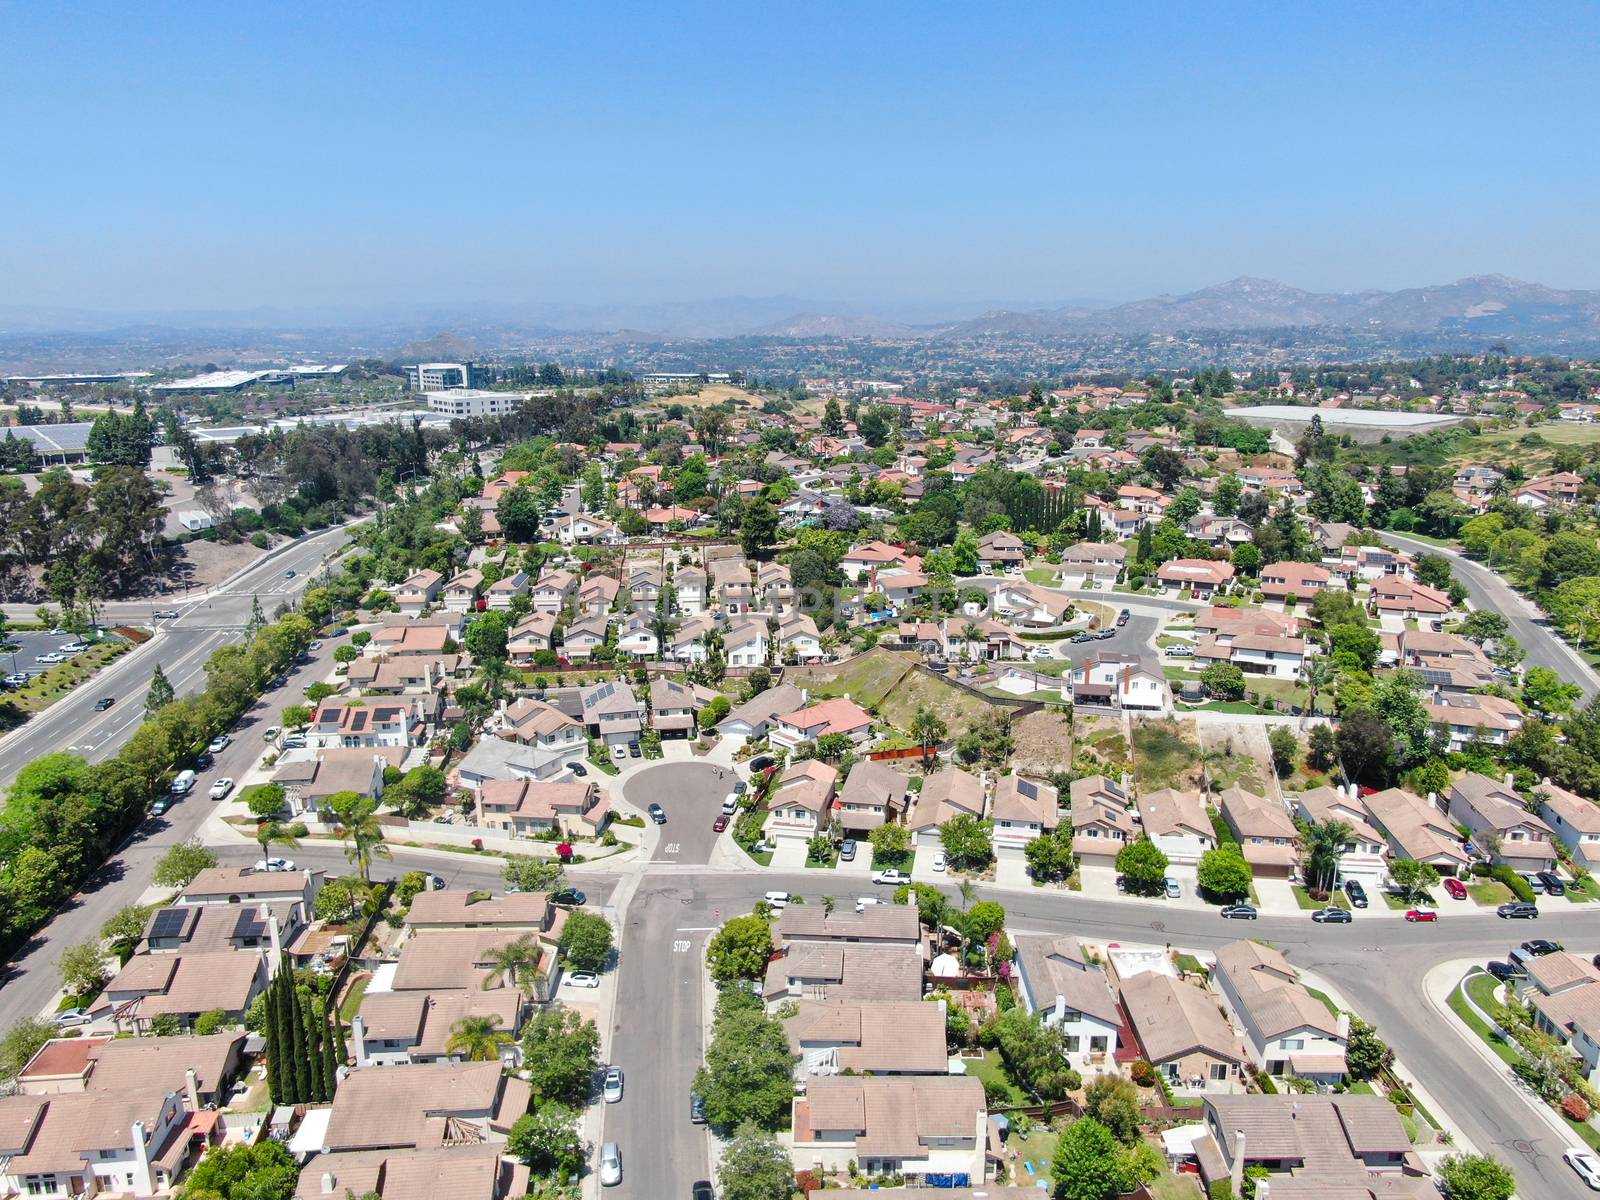 Aerial view of middle class neighborhood with residential house with swimming pool and mountain on the background in Rancho Bernardo, South California, USA.